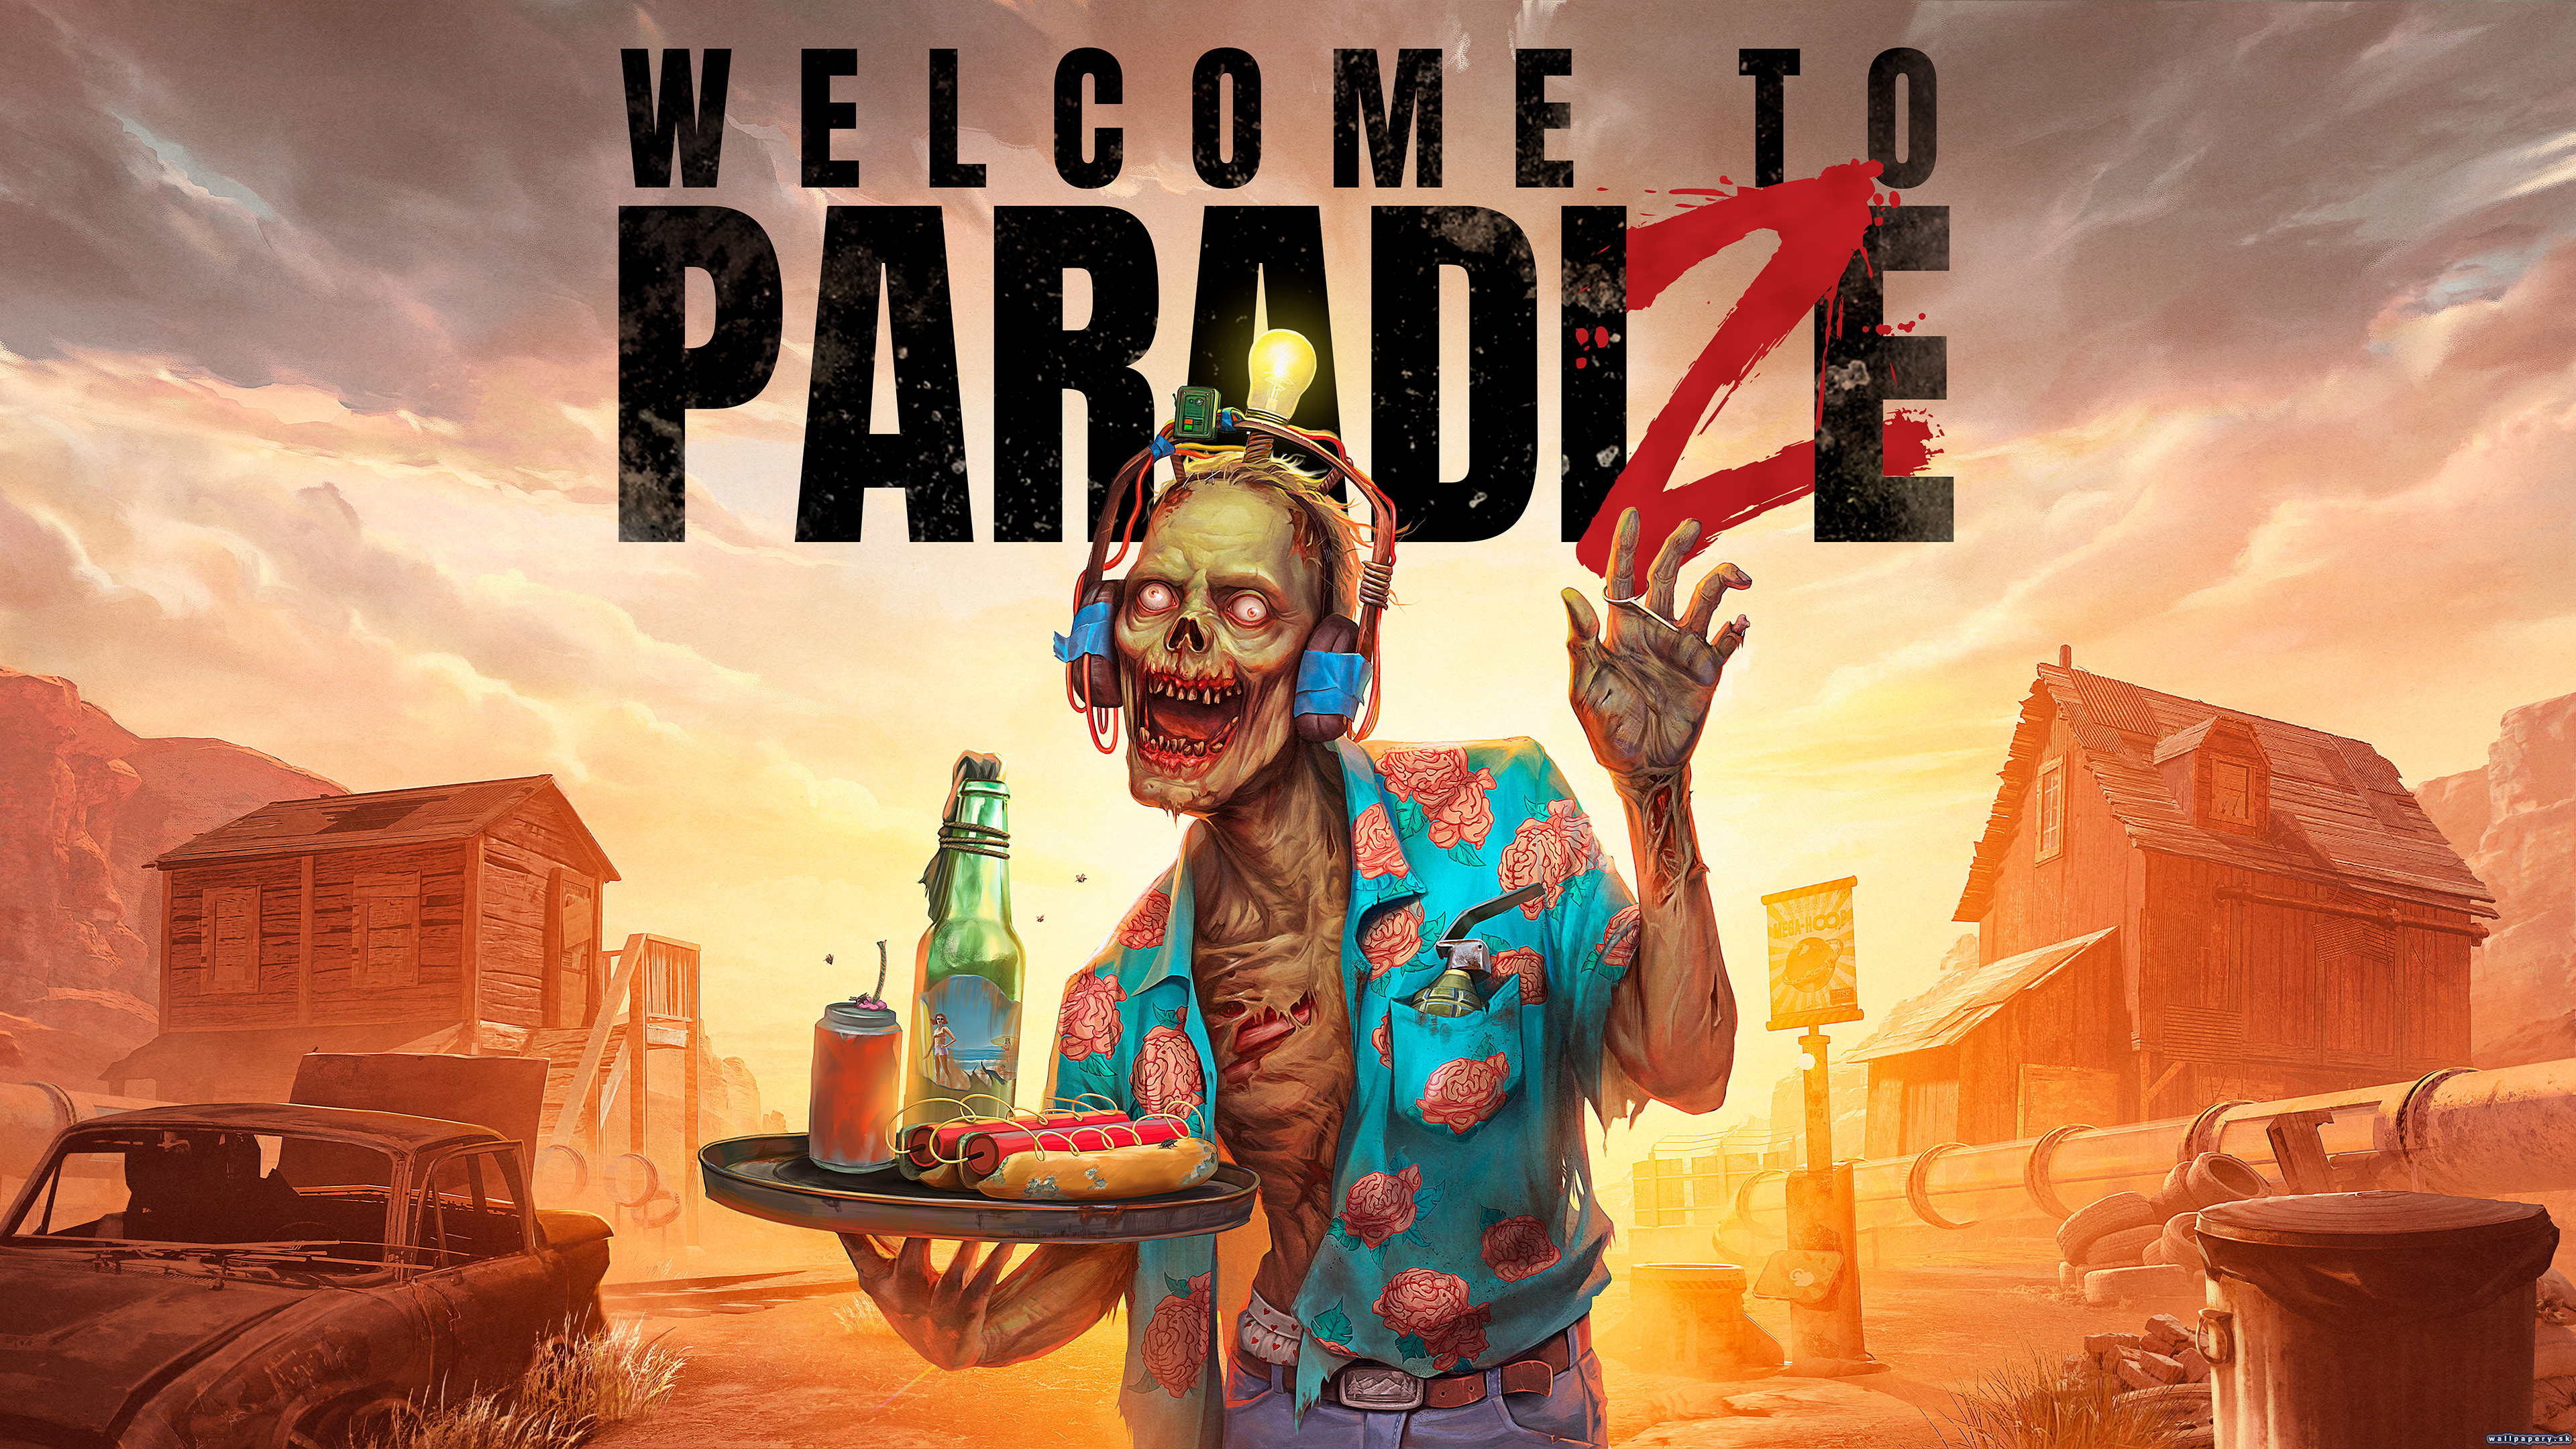 Welcome to ParadiZe - wallpaper 1